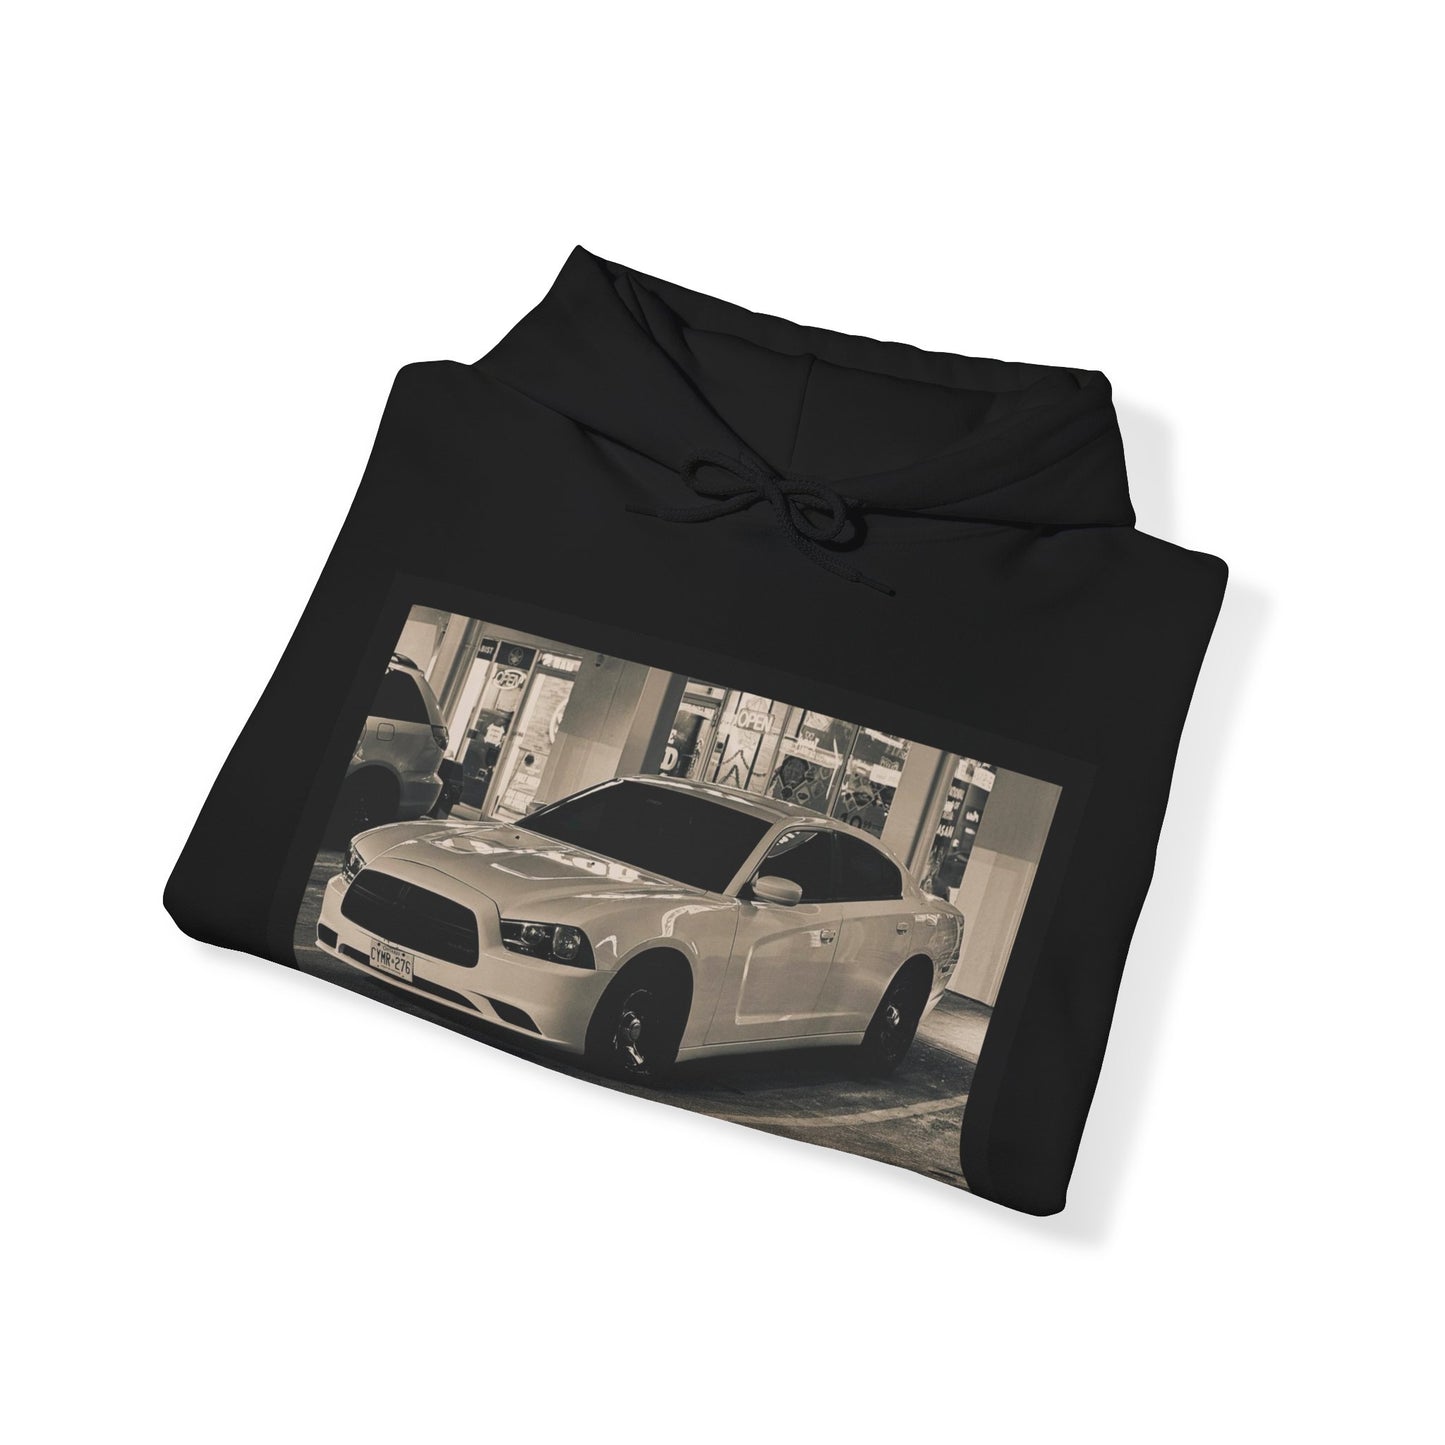 Dodge Charger Hoodie | Mopar | Muscle Car | Charged Up | TGWC